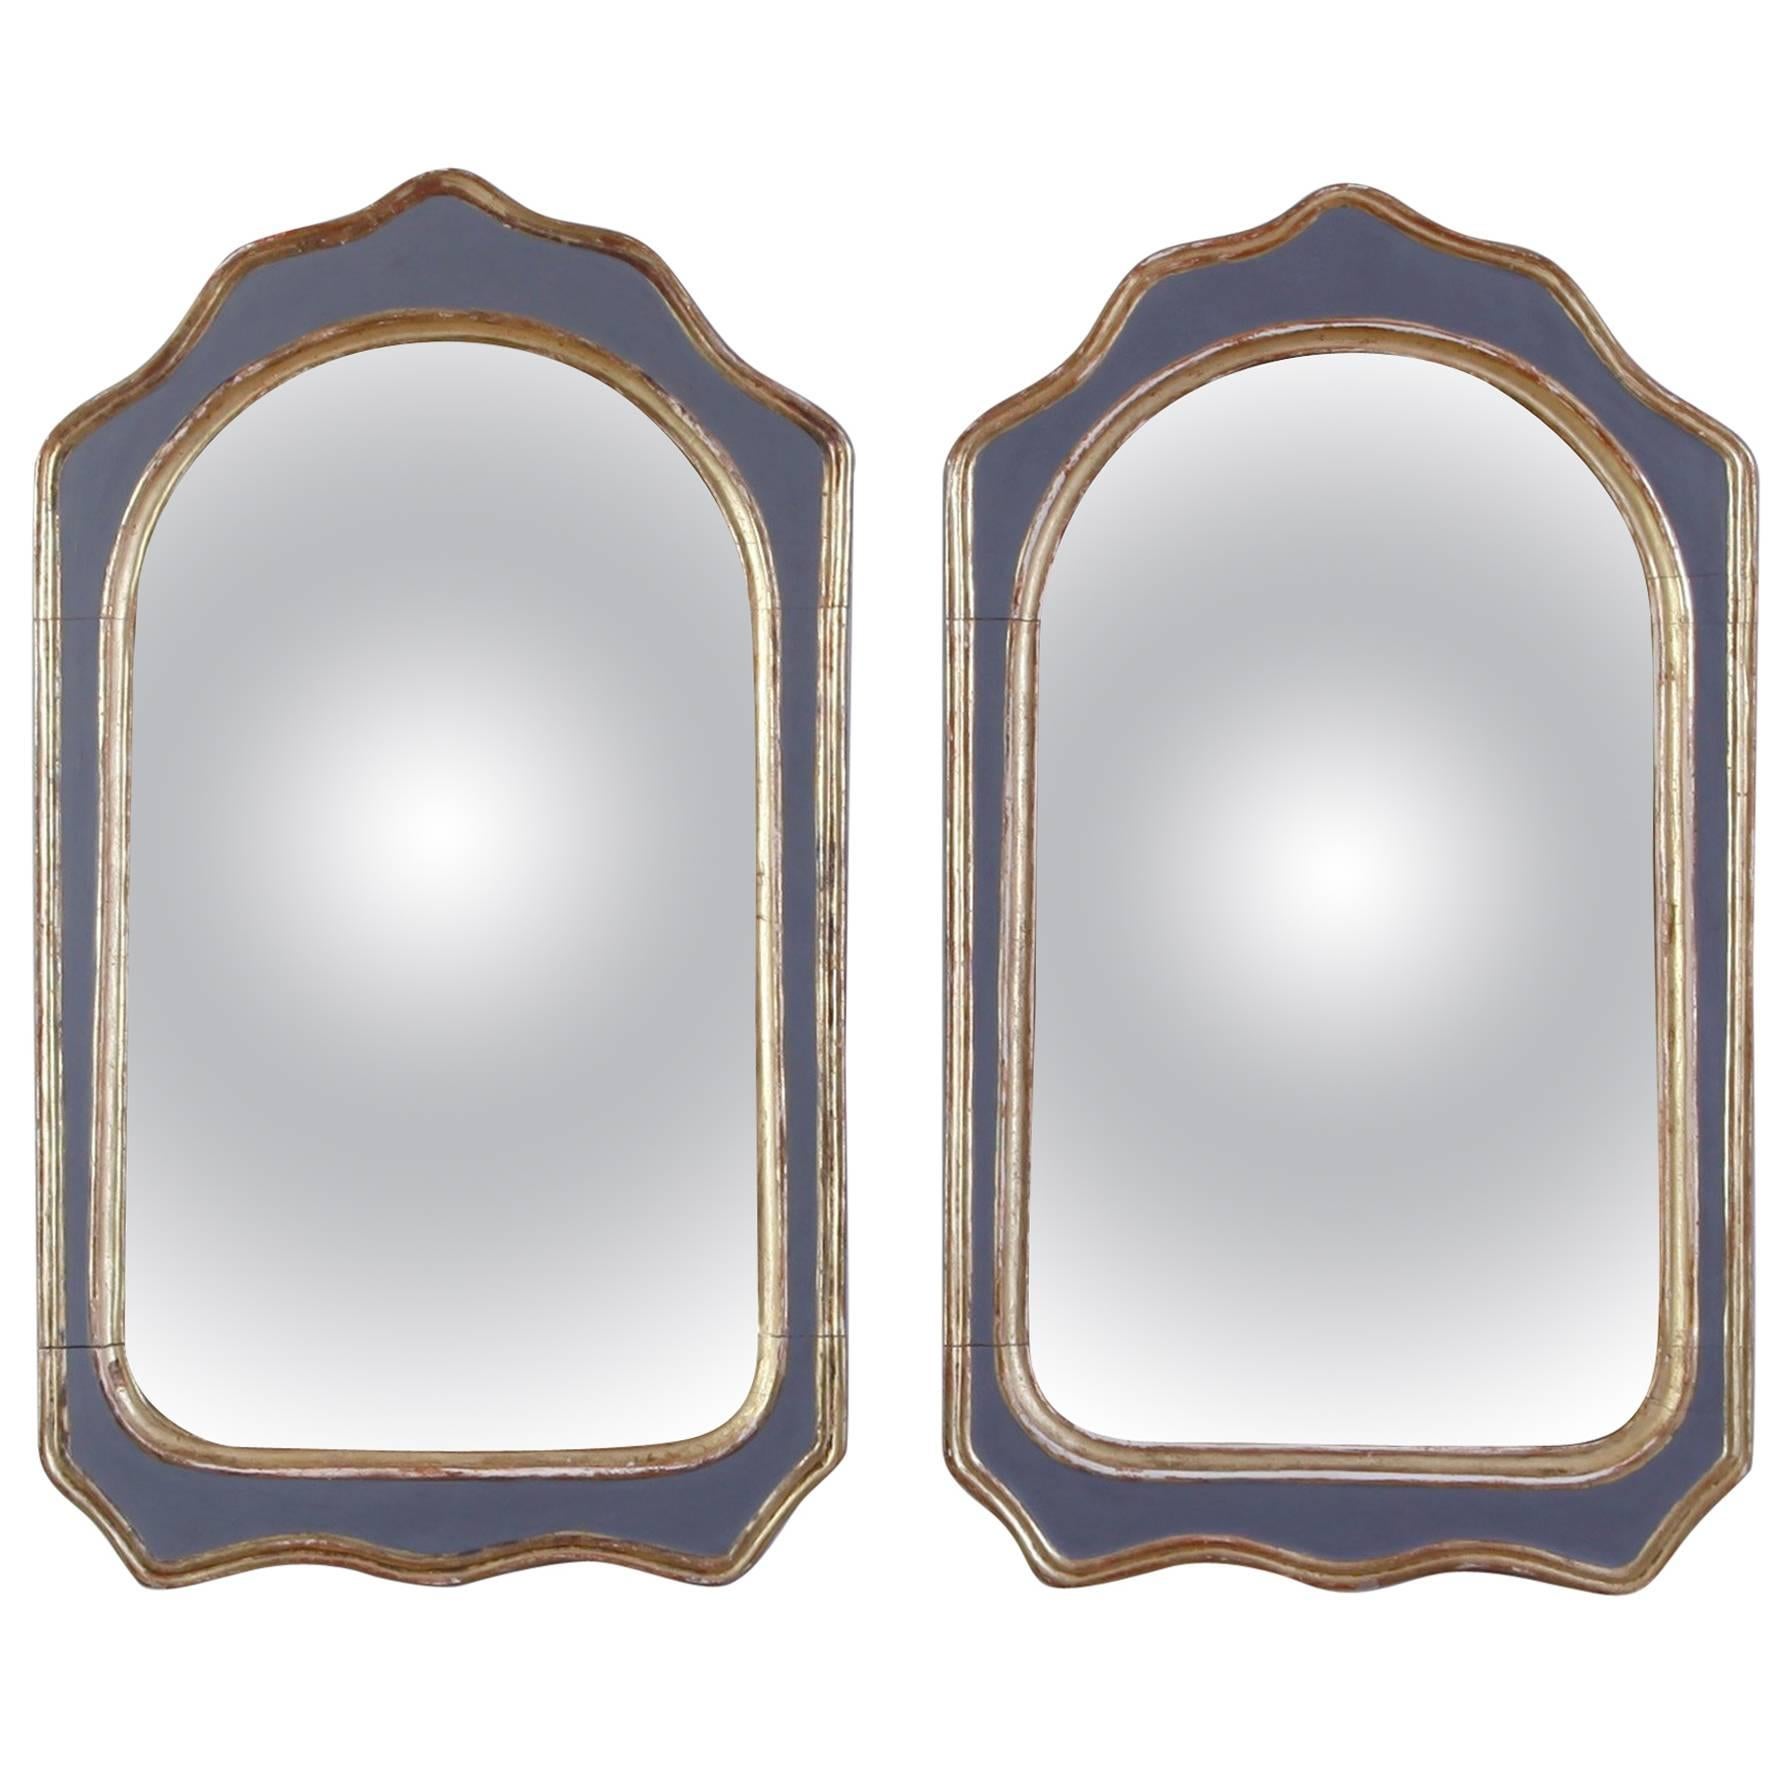 Pair of Painted and Gilt Convex Mirrors